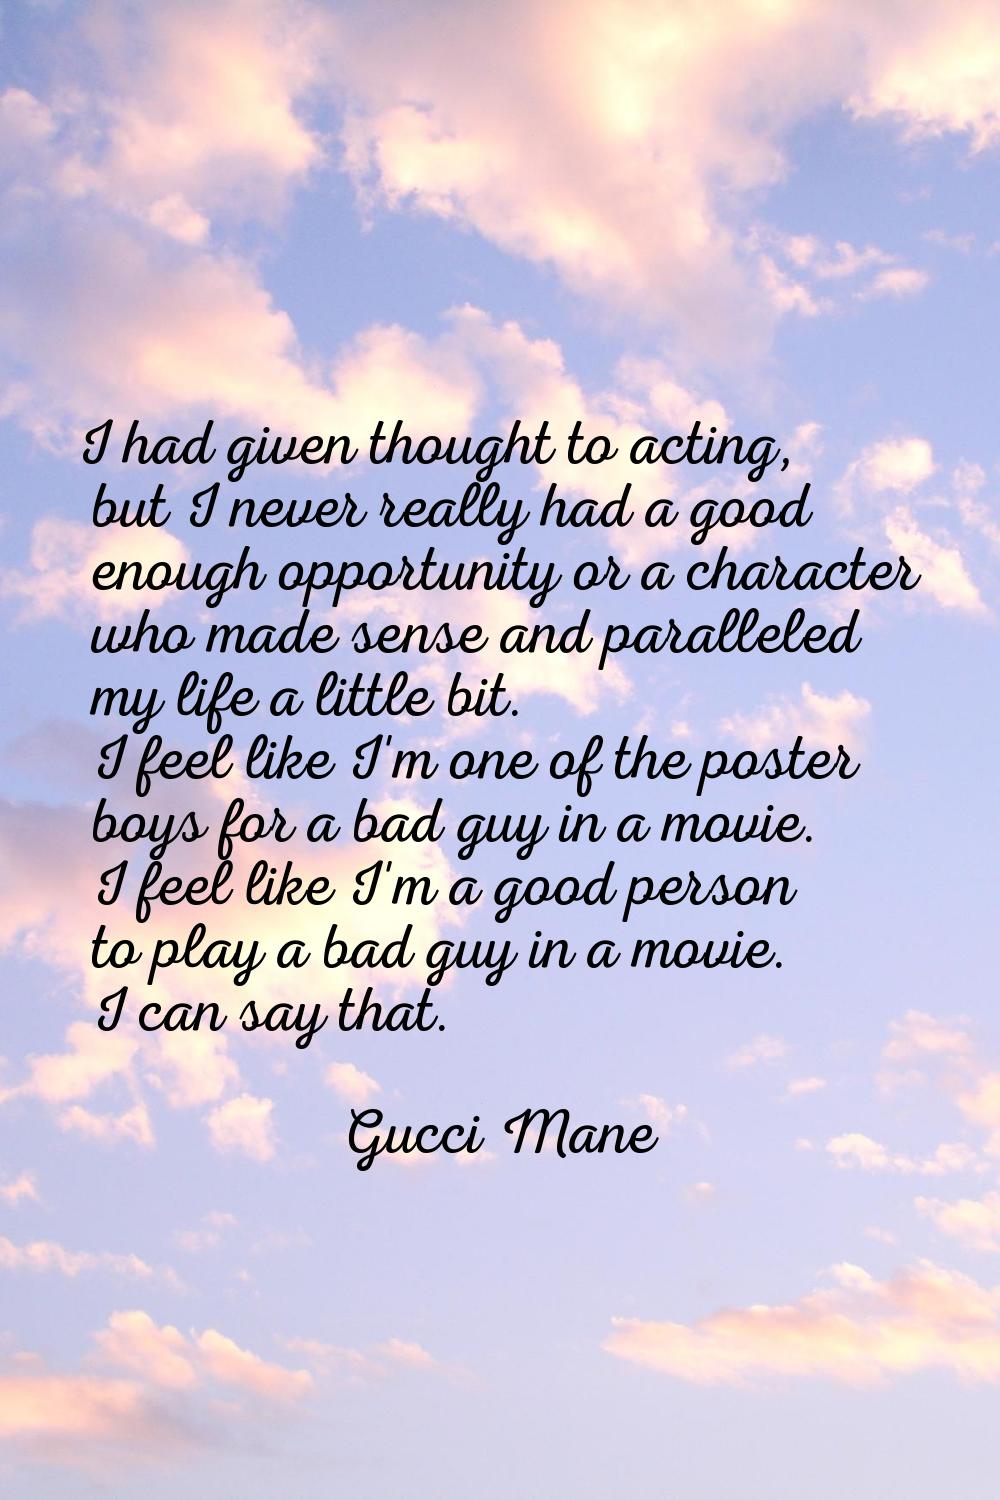 I had given thought to acting, but I never really had a good enough opportunity or a character who 